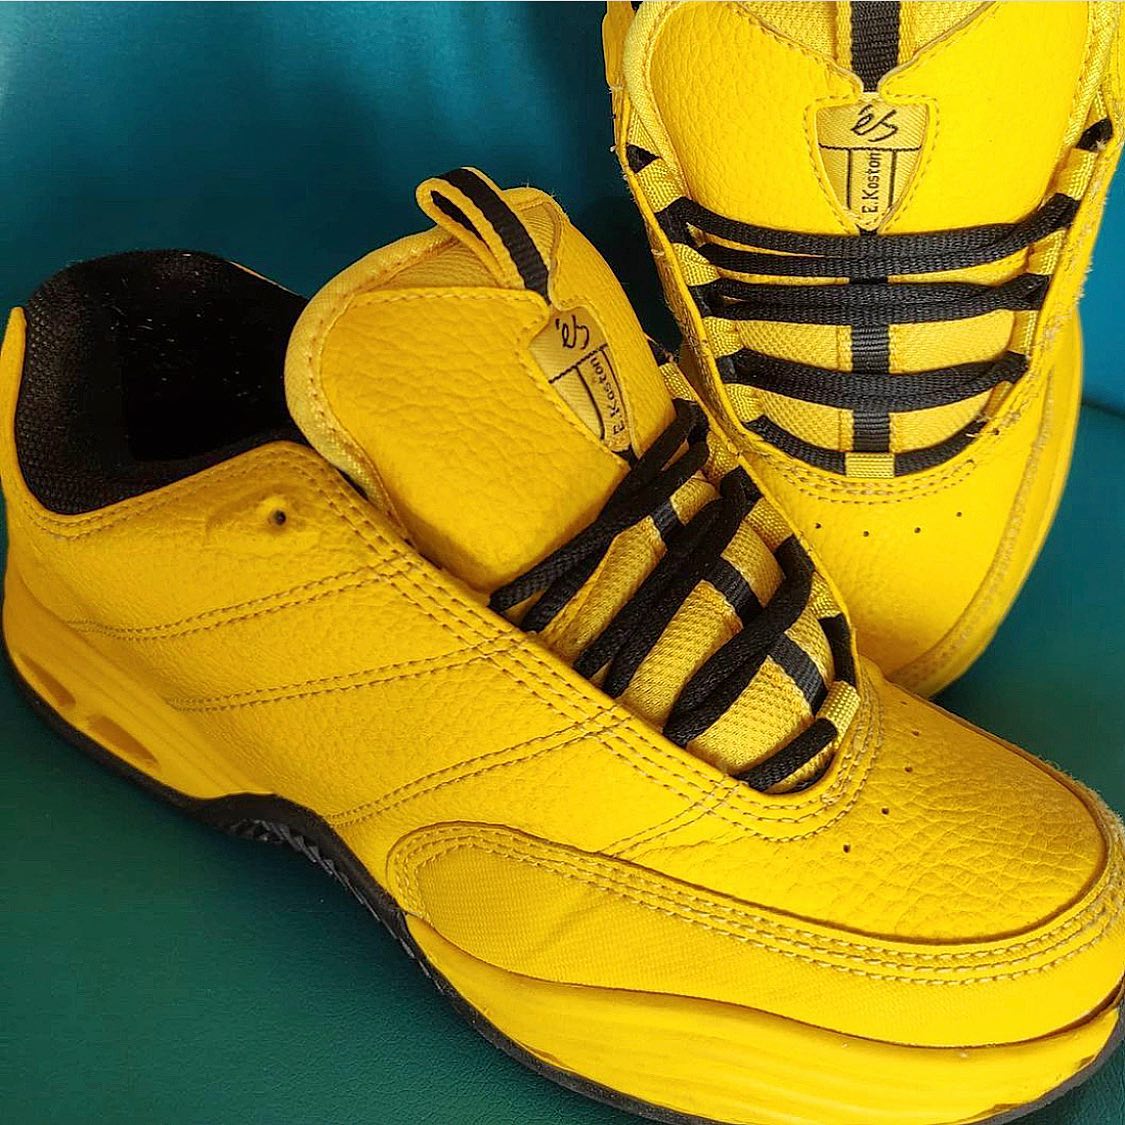 @isho3syou is selling théSe size 8.5 K3 bumblebees  Hit him up to cop, NOT US.  #esskateboarding #sk8shoewars